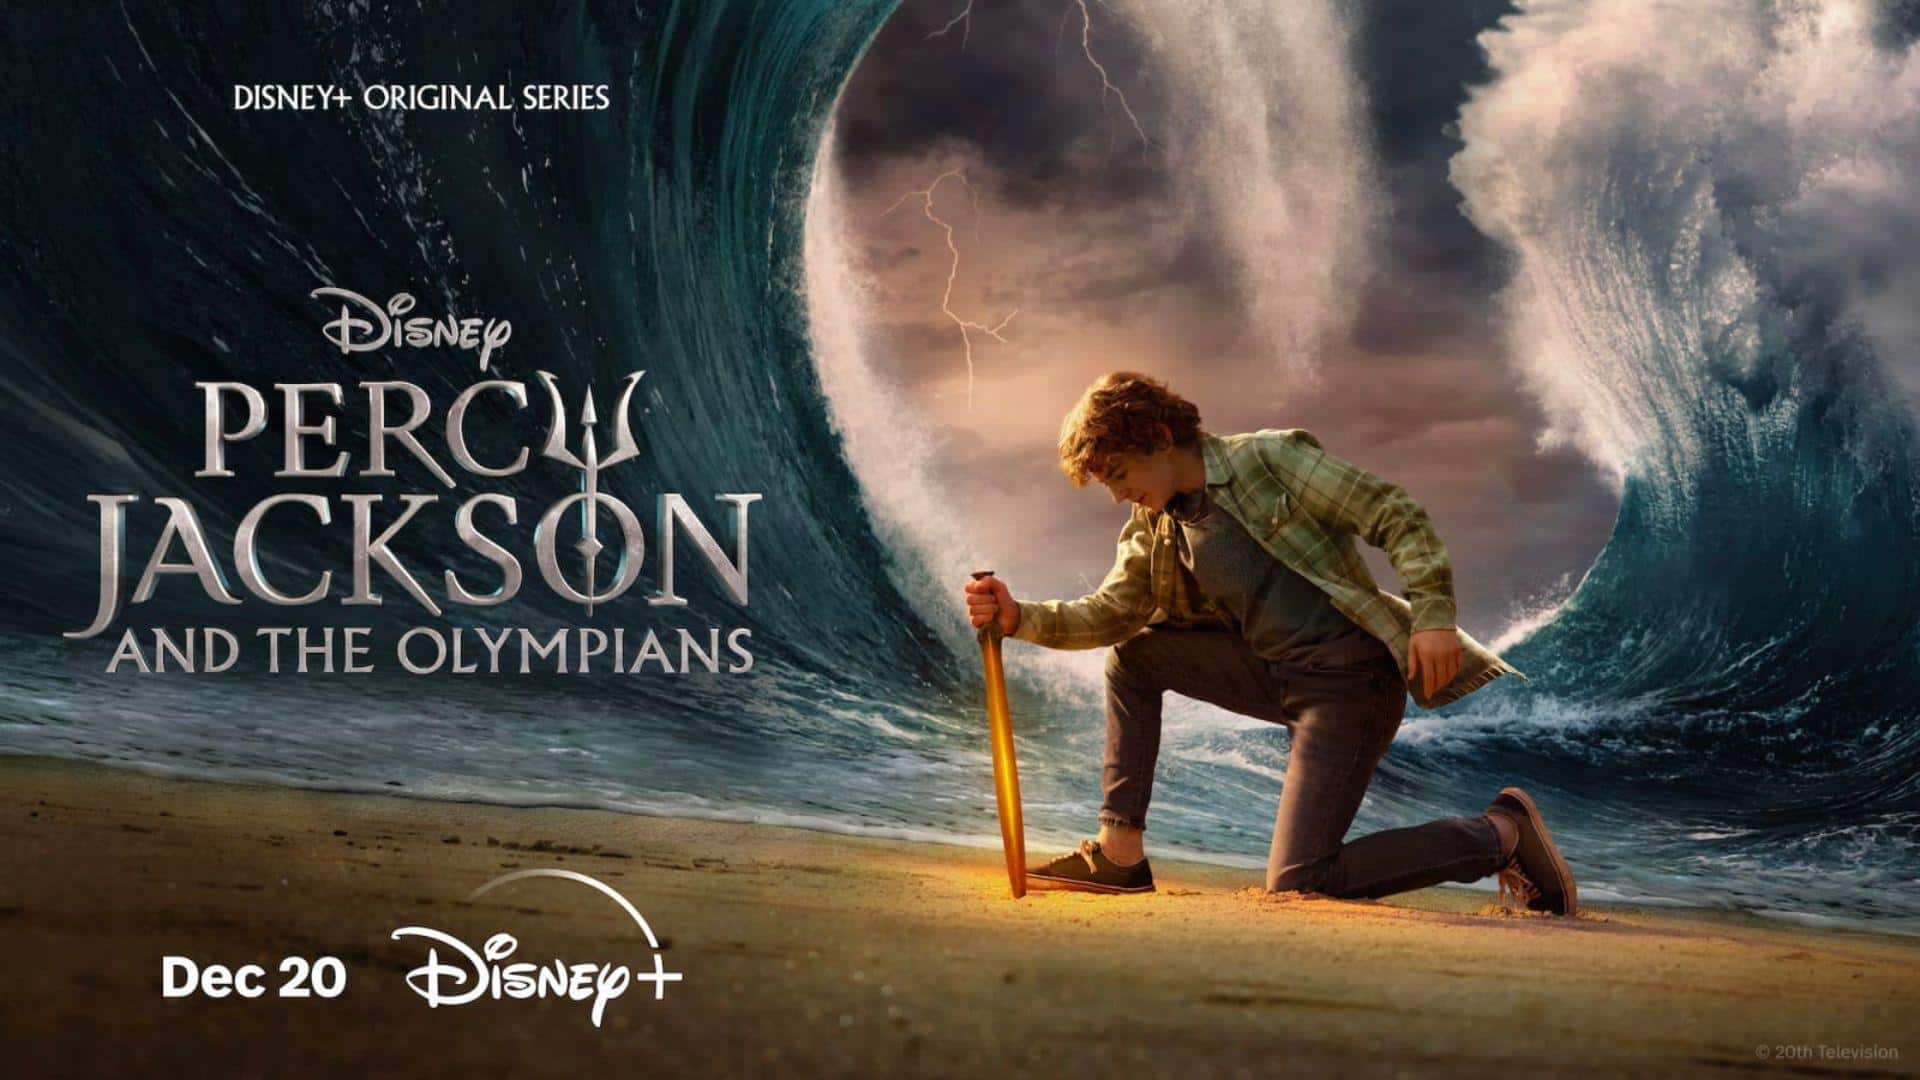 'Percy Jackson and the Olympians' hits screens sooner than expected!